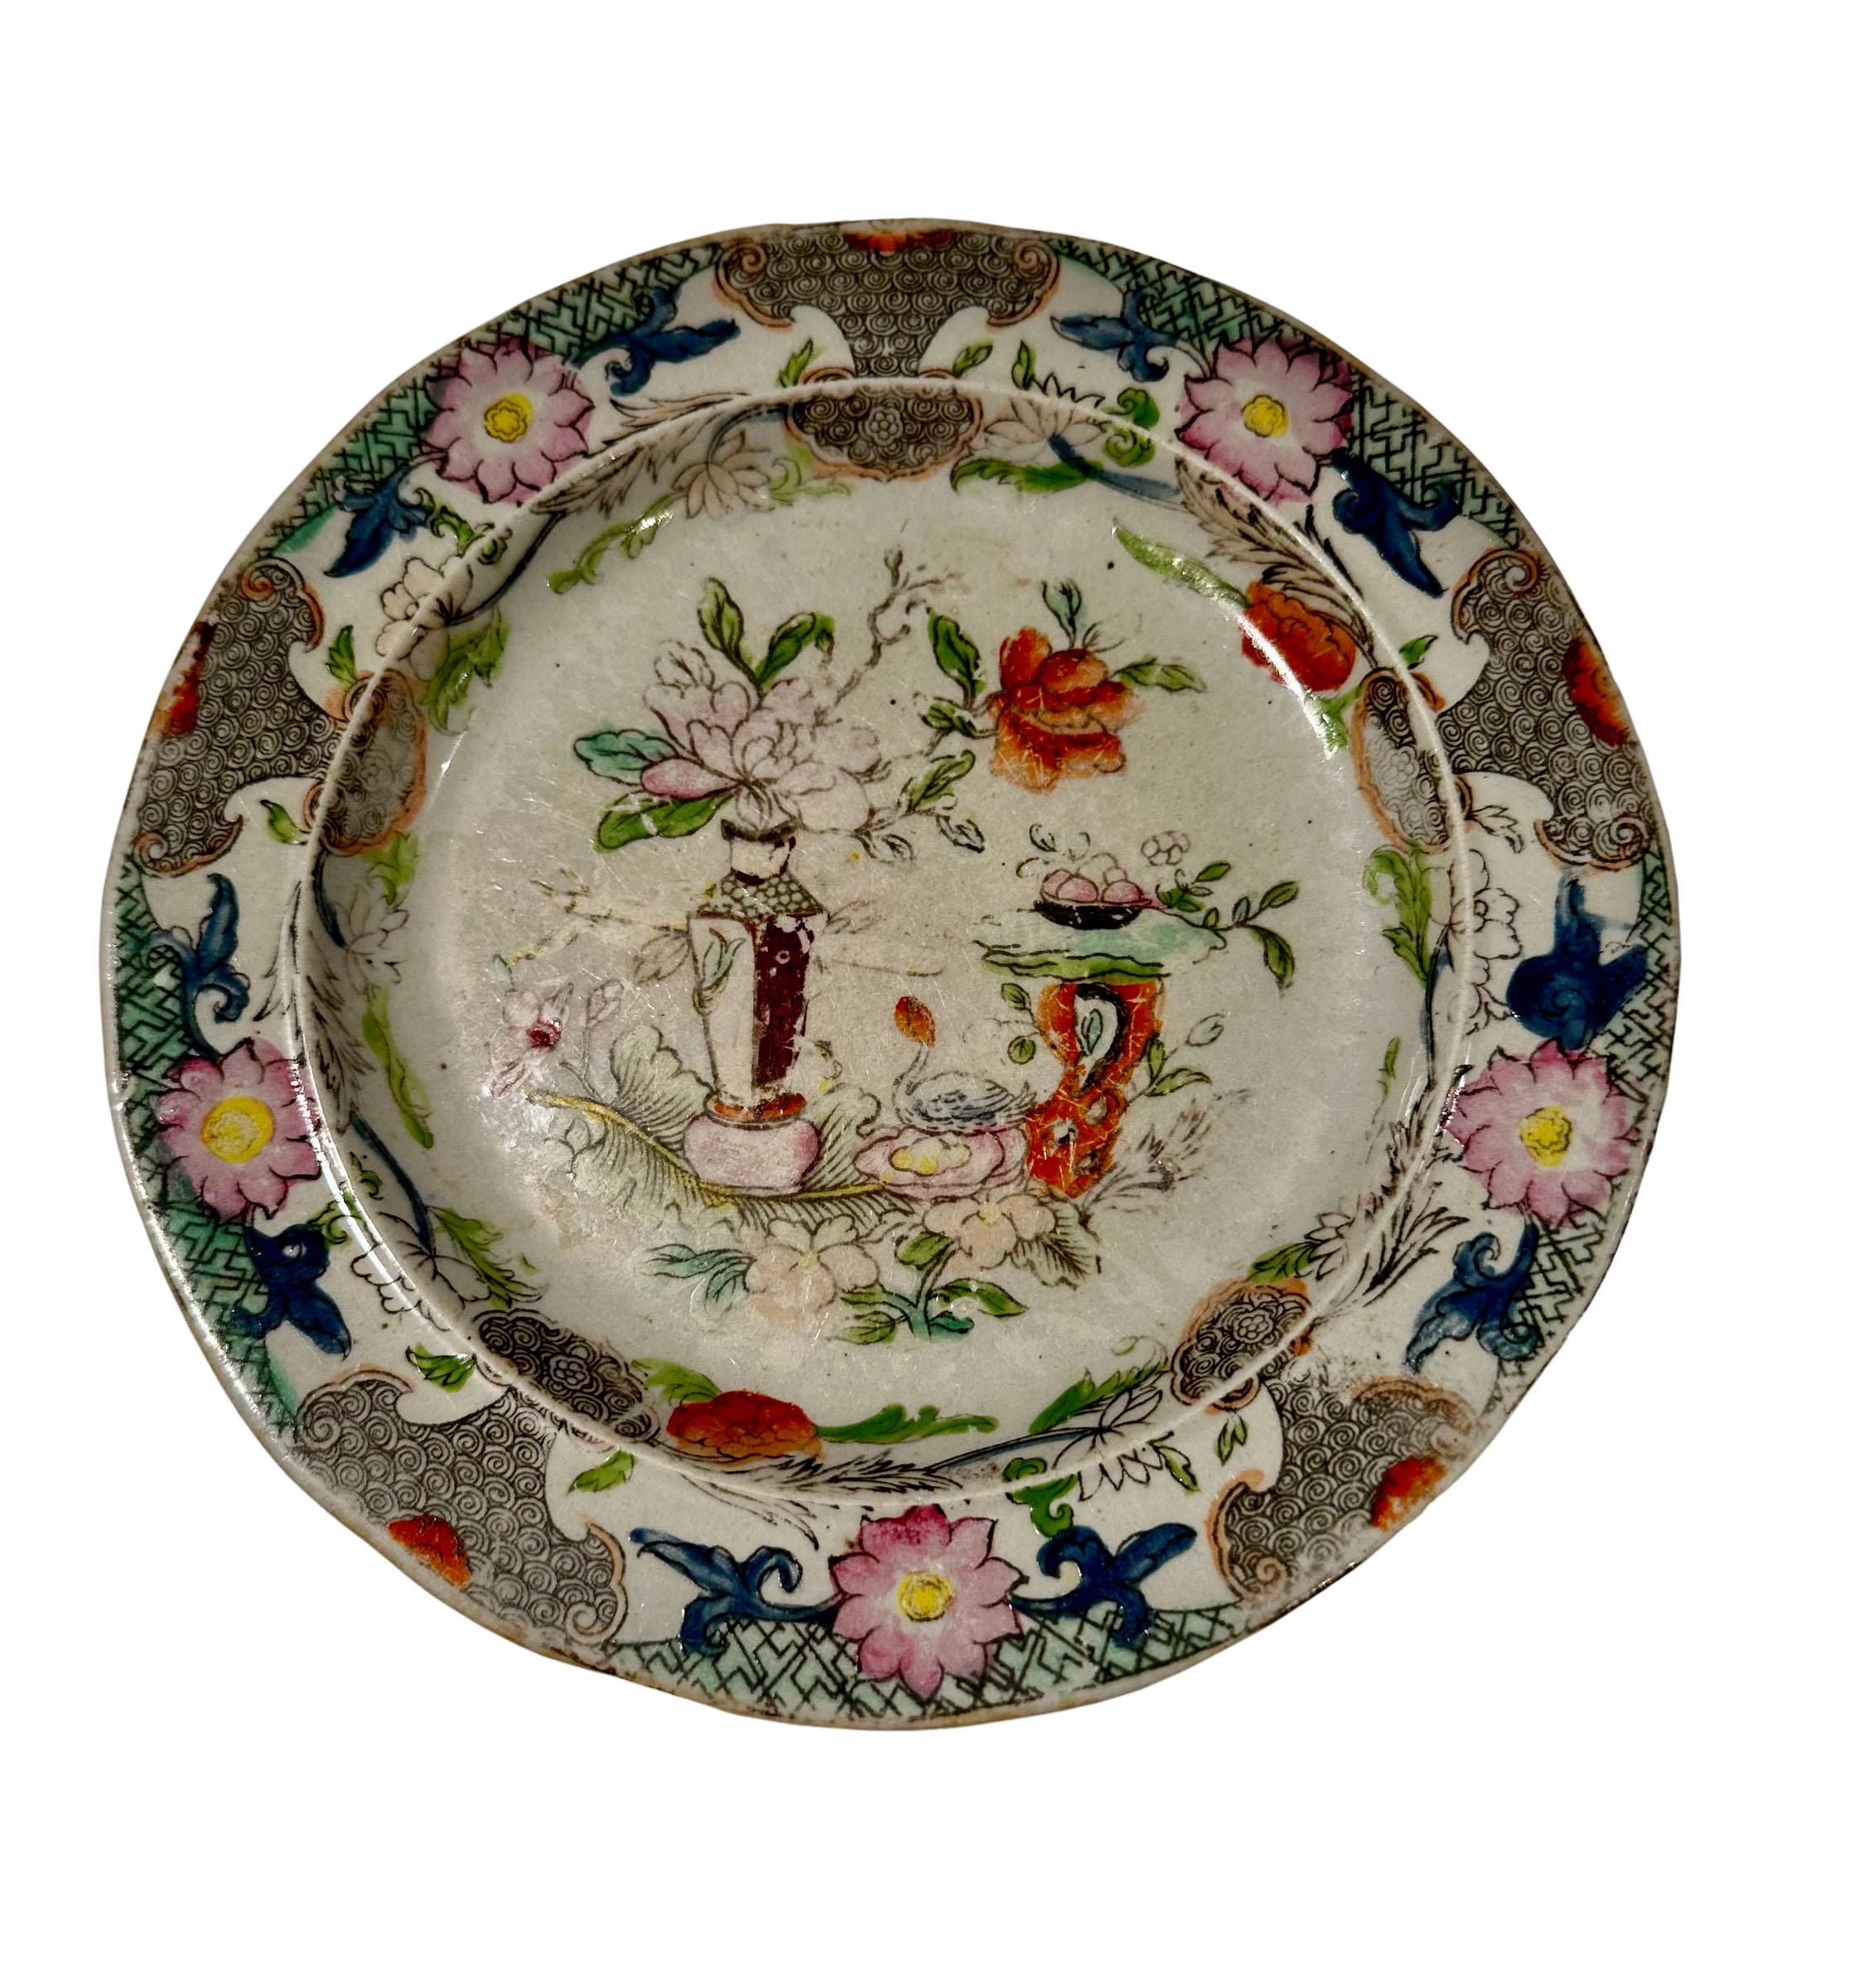 A set of five Mason Ironstone chinoiserie plates, table and flower pot. From a very prestigious, Atlanta antique shop call Jane Marsden.